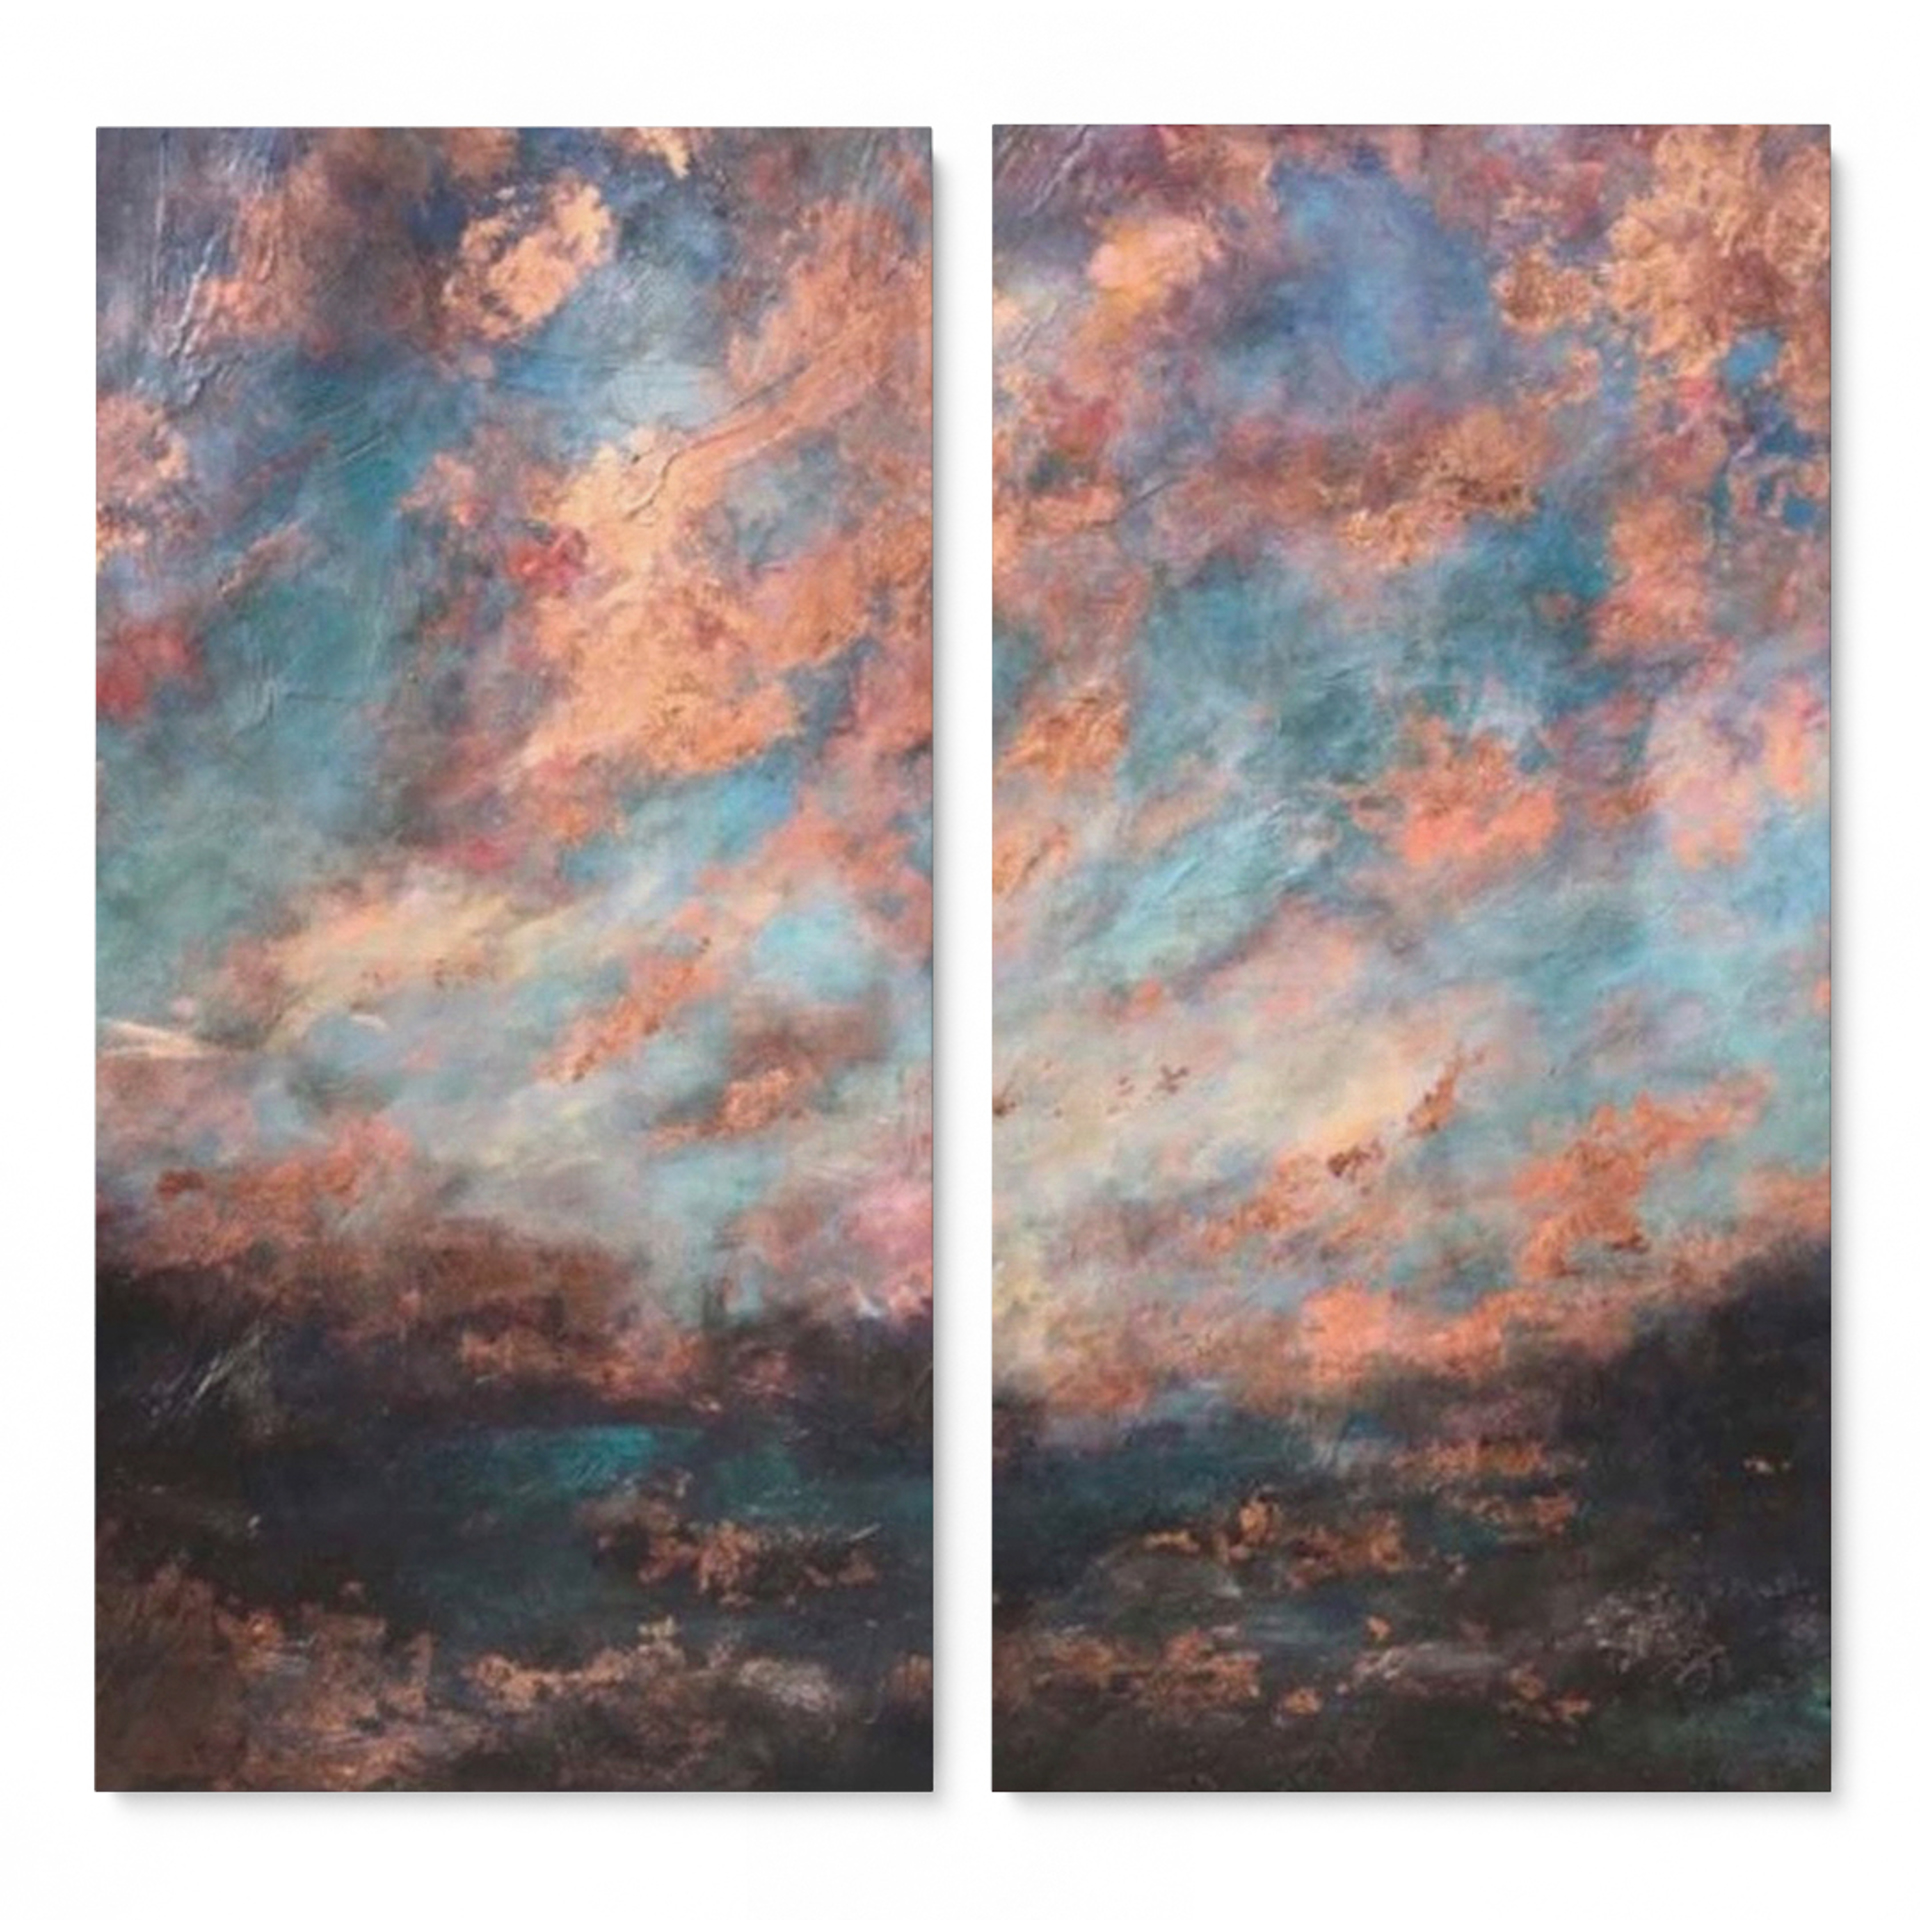 Paradise Found (diptych) by Nicole Etienne